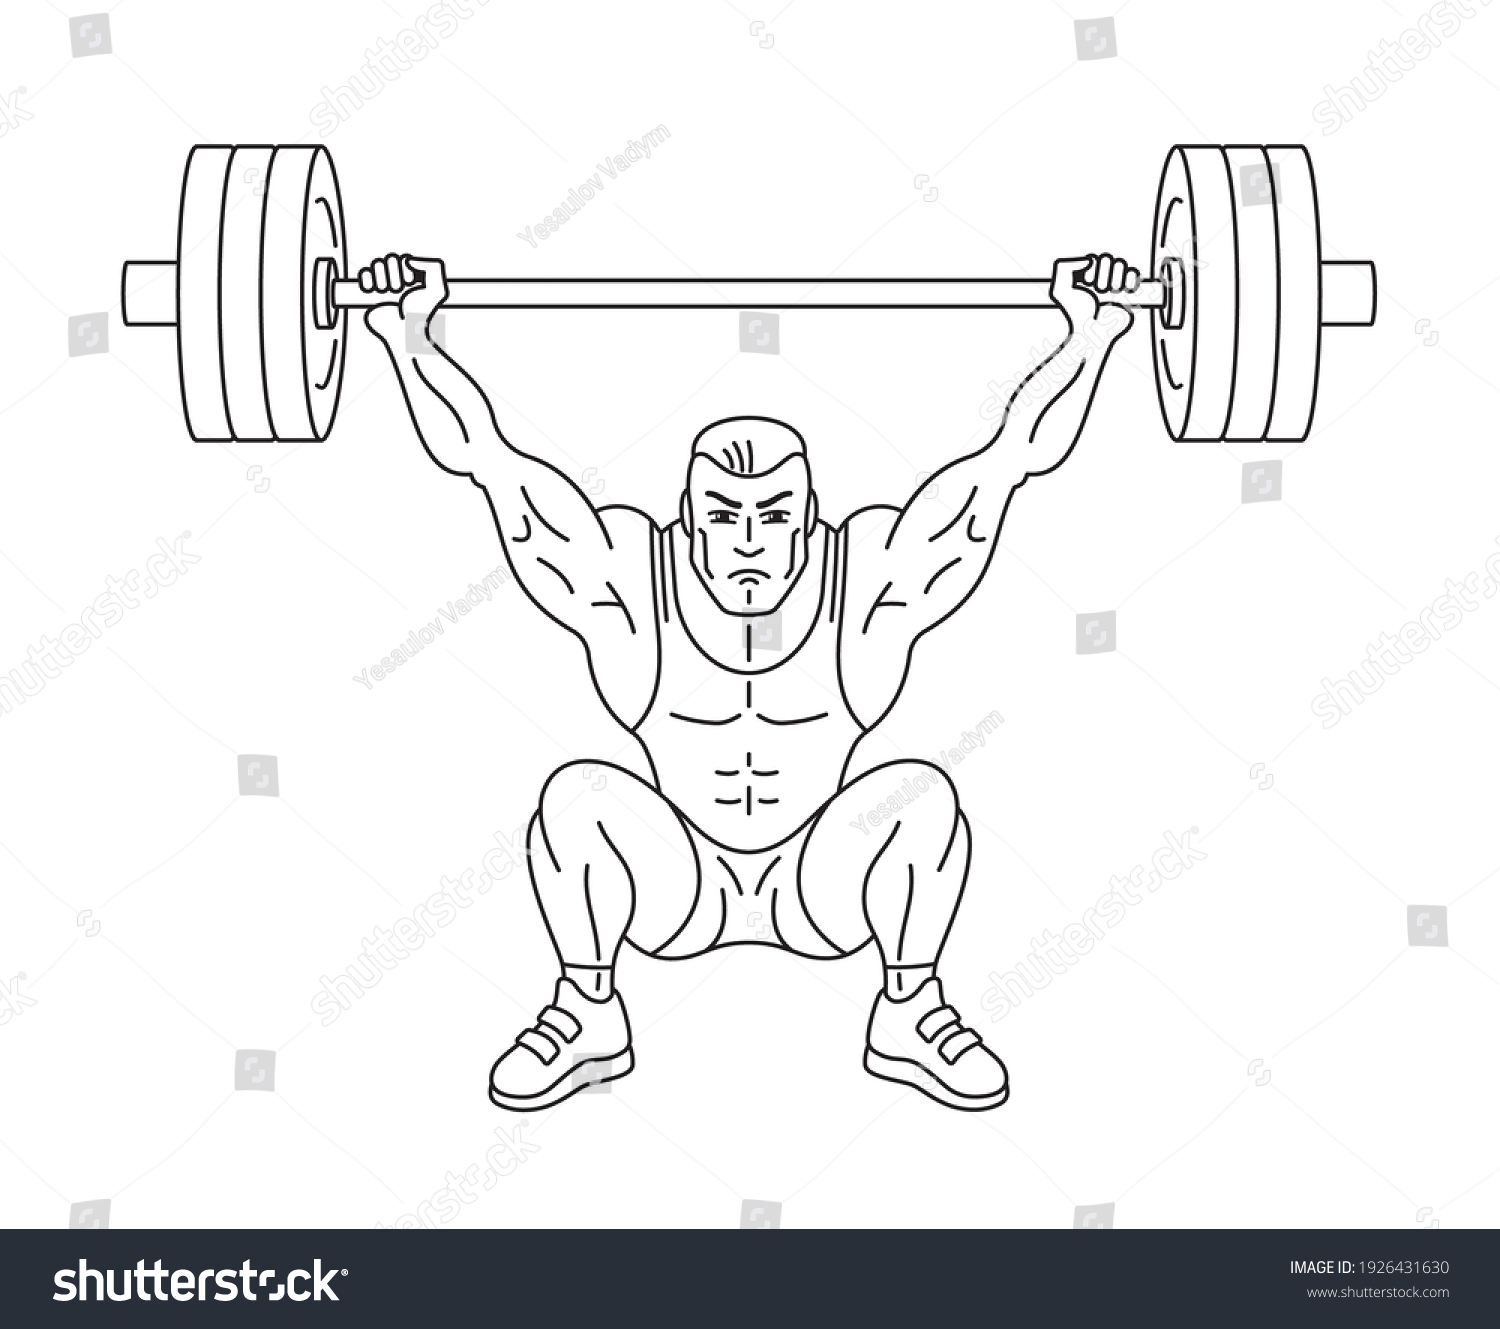 SVG of Black and white illustration of strong muscular weightlifter who lifting barbell.  Illustration of weightlifting snatch execution. Linear style svg